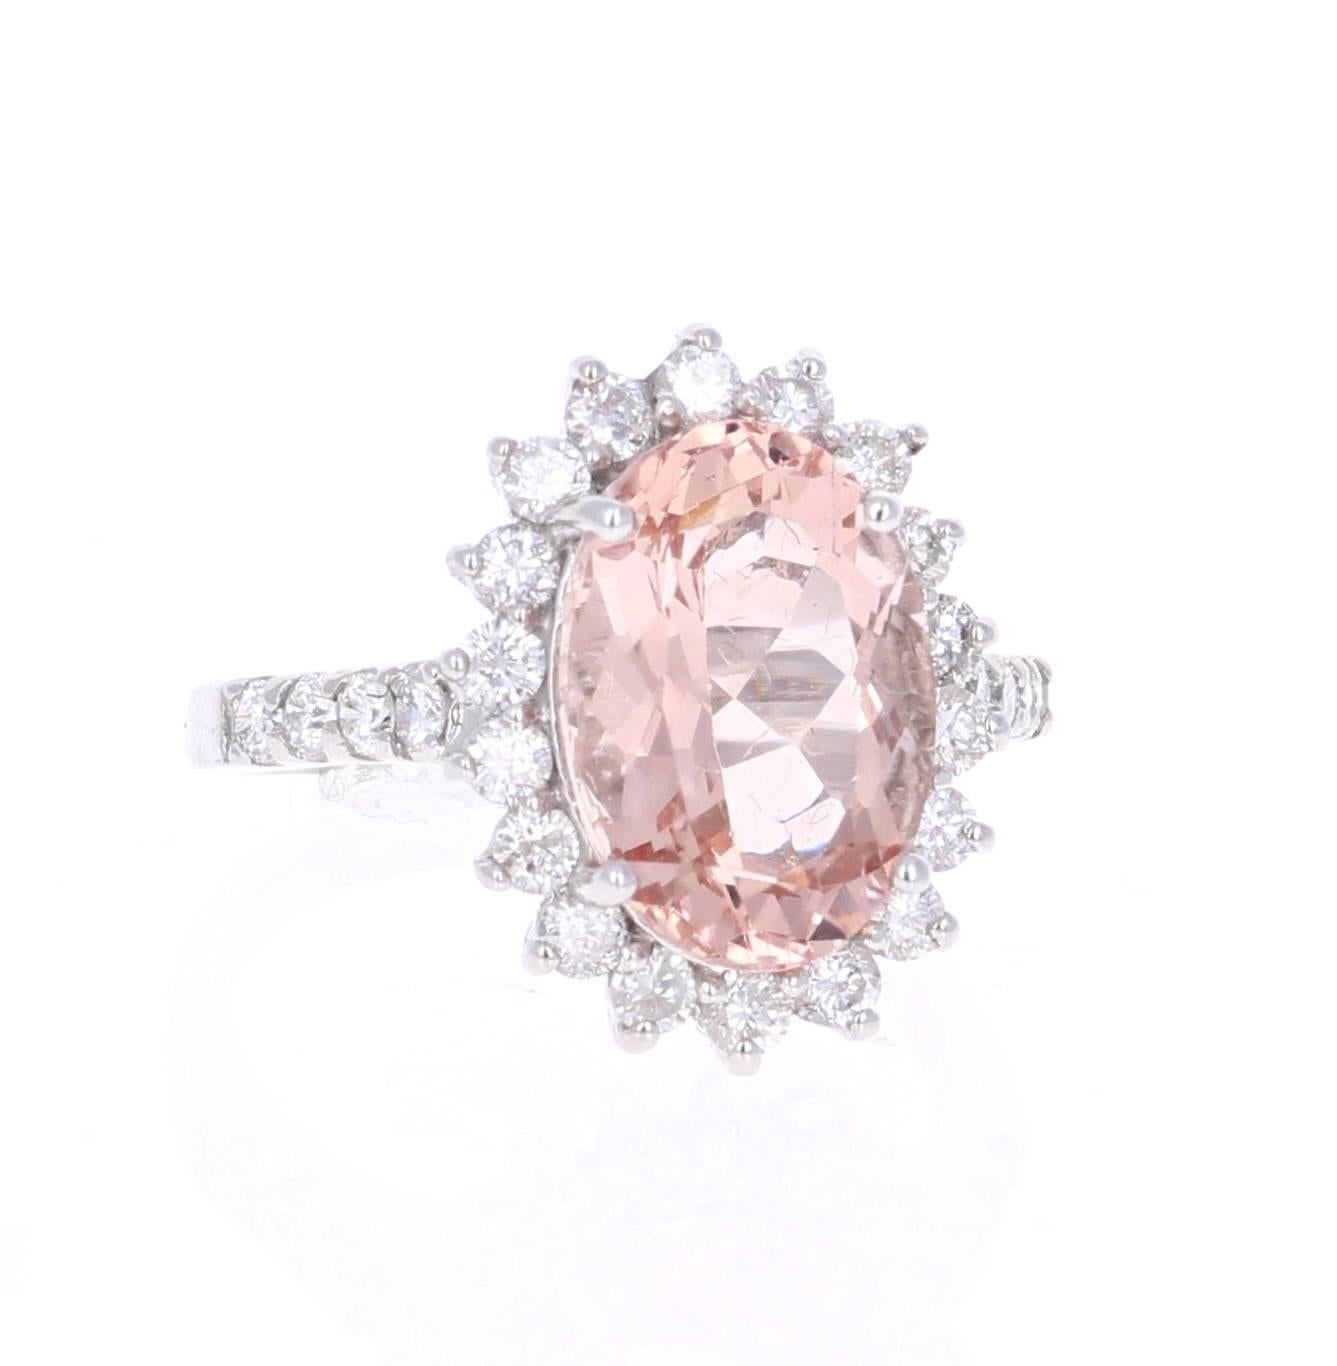 Beautifully set 5.57 Carat Oval Cut Morganite and Diamond Ring in 14K White Gold.   In the center of the ring, there is a 4.62 carat Oval Cut Morganite and is surrounded by 26 Round Cut Diamonds that weigh a total of 0.95 carats Clarity: SI, Color: